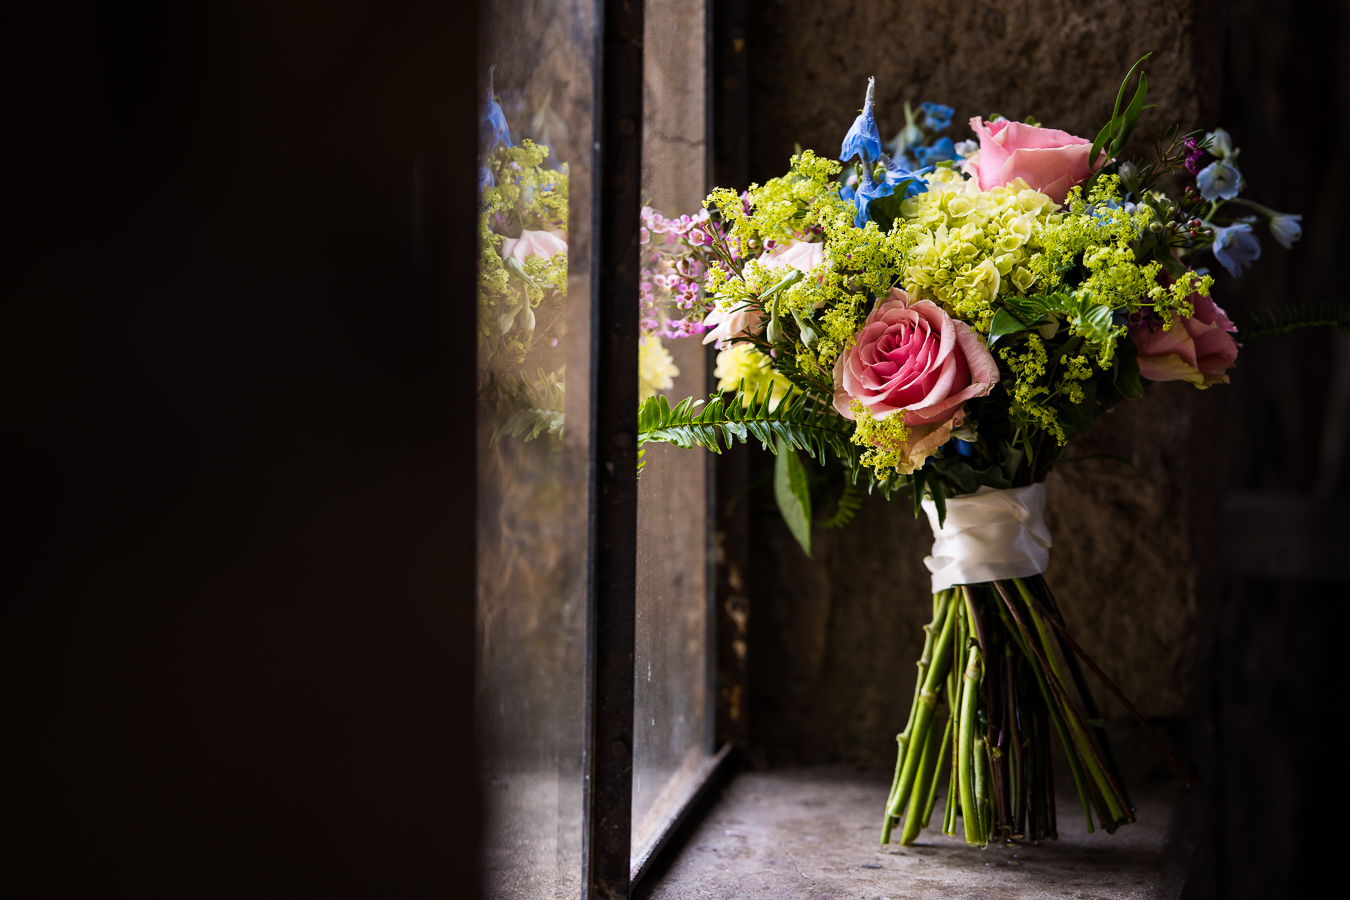 lisa rhinehart, best pa wedding photographer, captures this vibrant, colorful image of the brides bouquet as it sits against the window sill at their wedding venue 